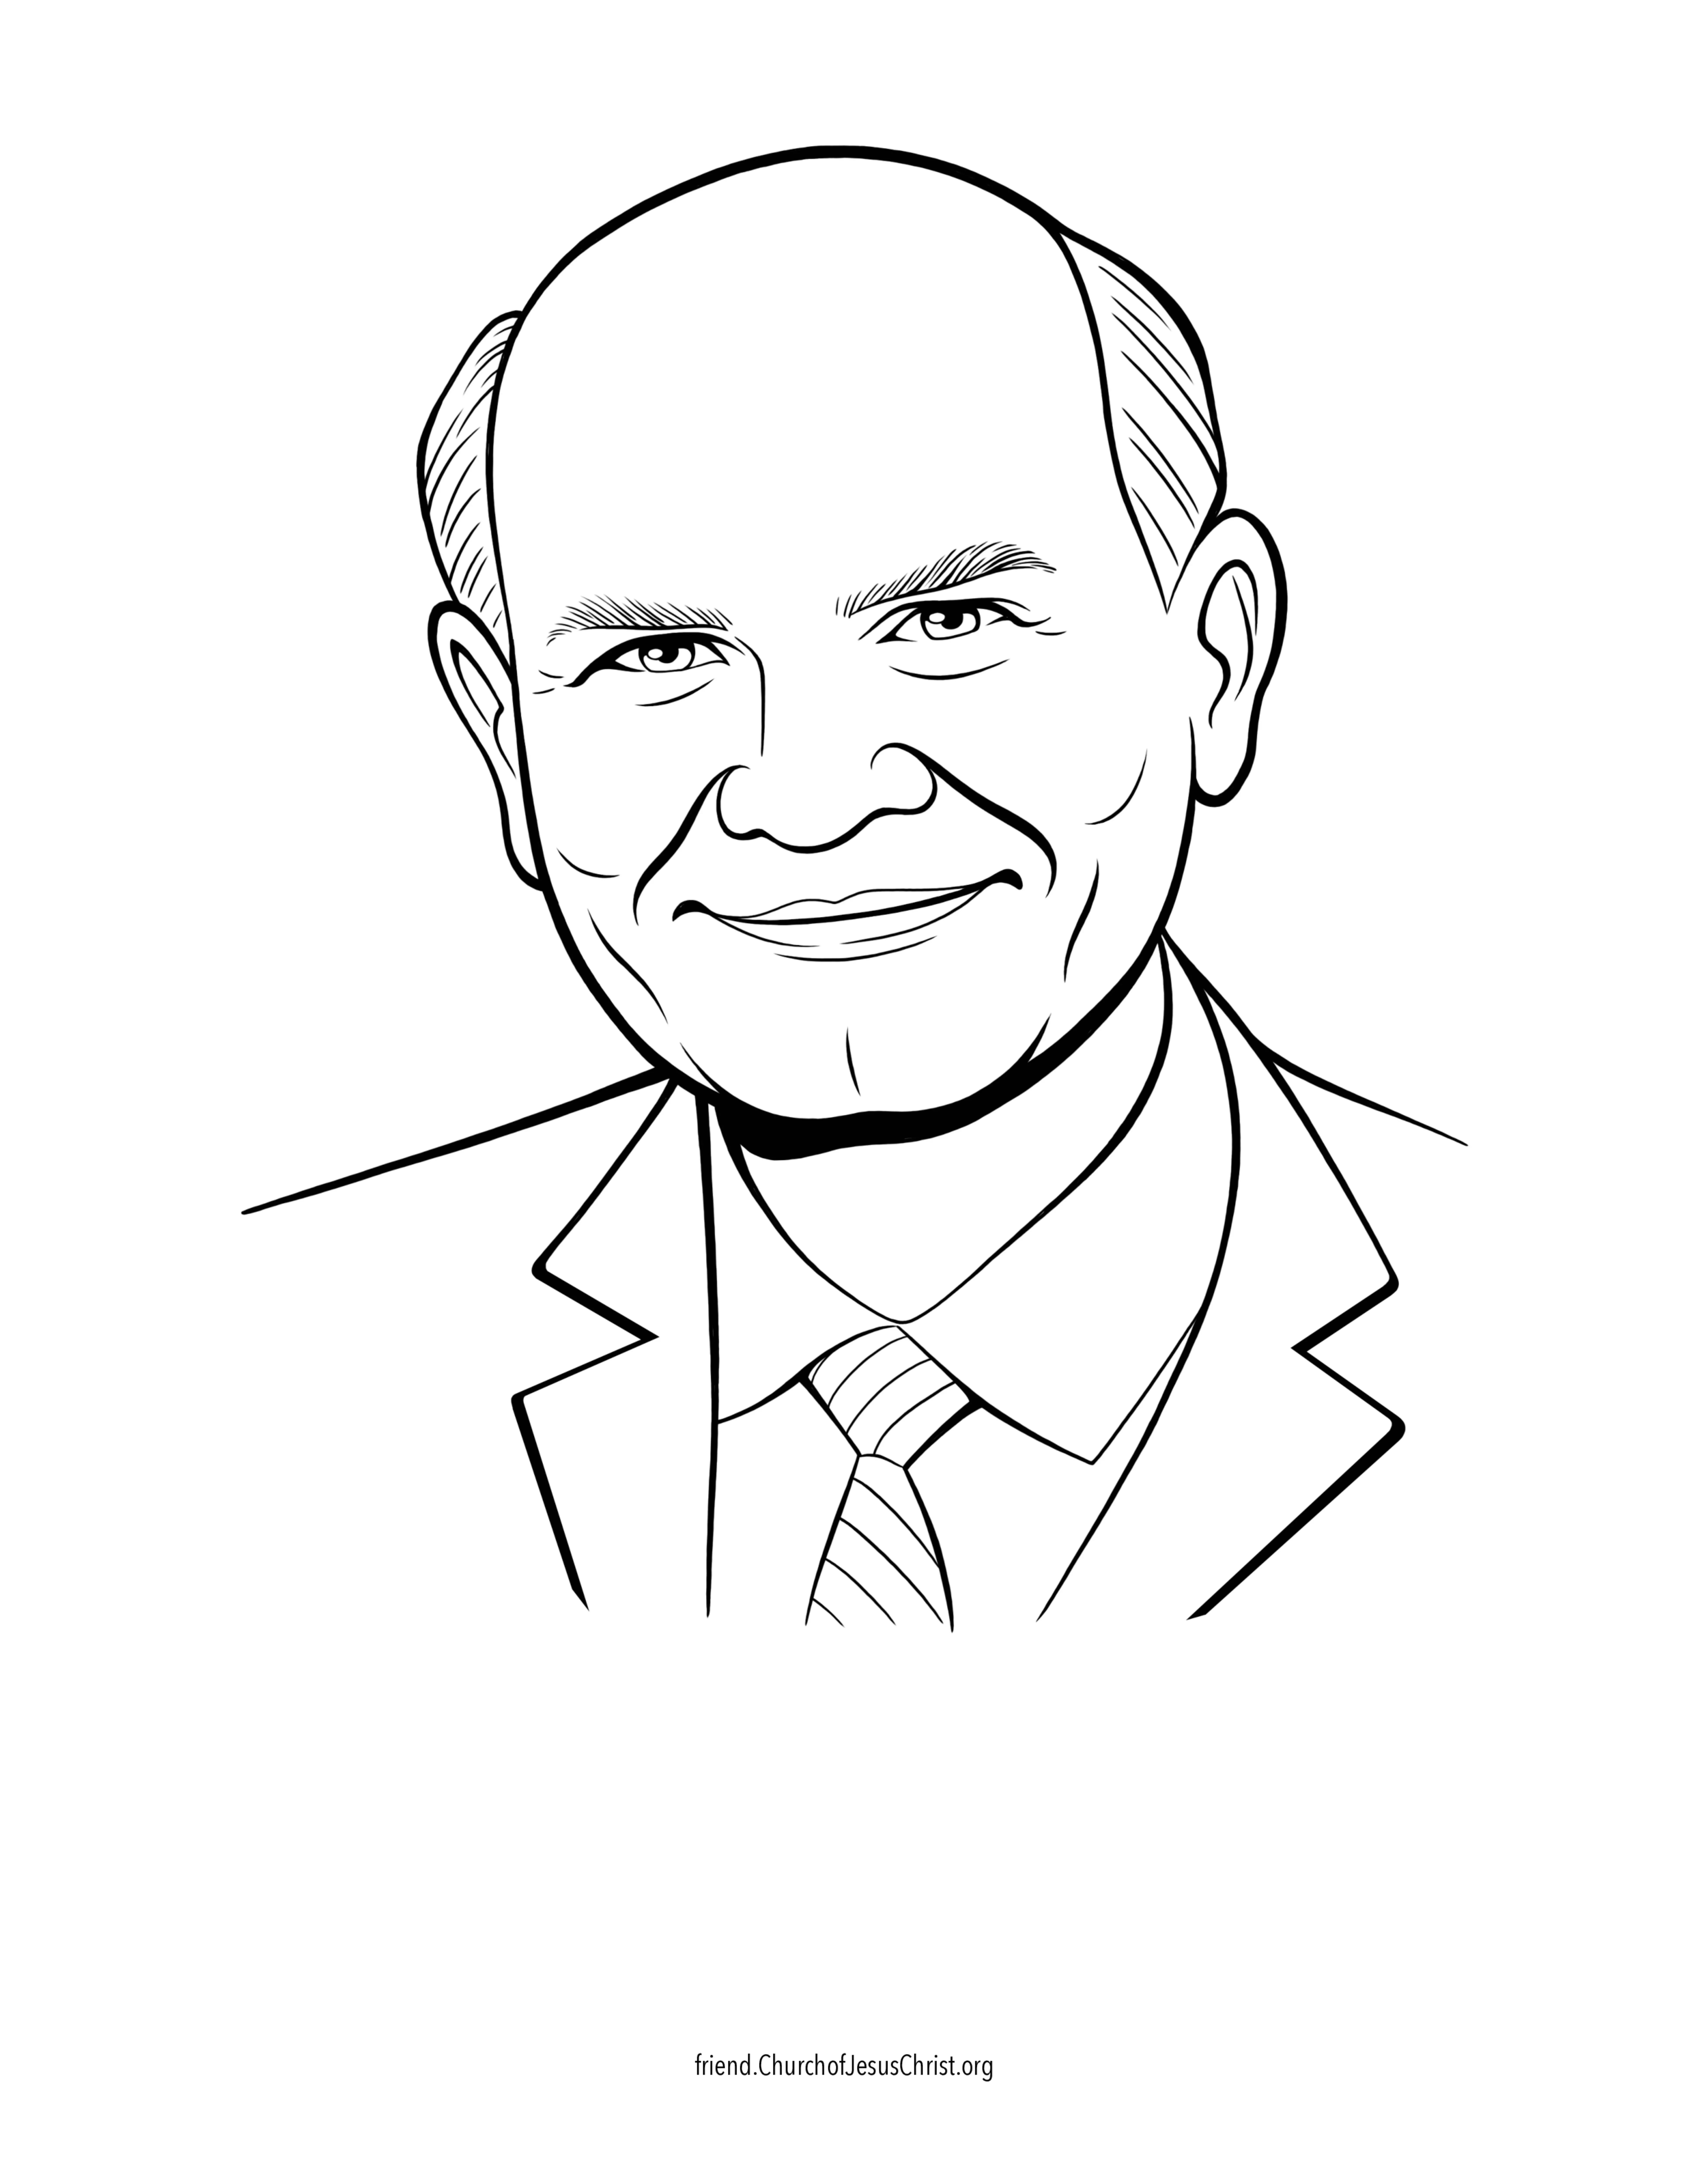 A coloring page of the official portrait of Dale G. Renlund.